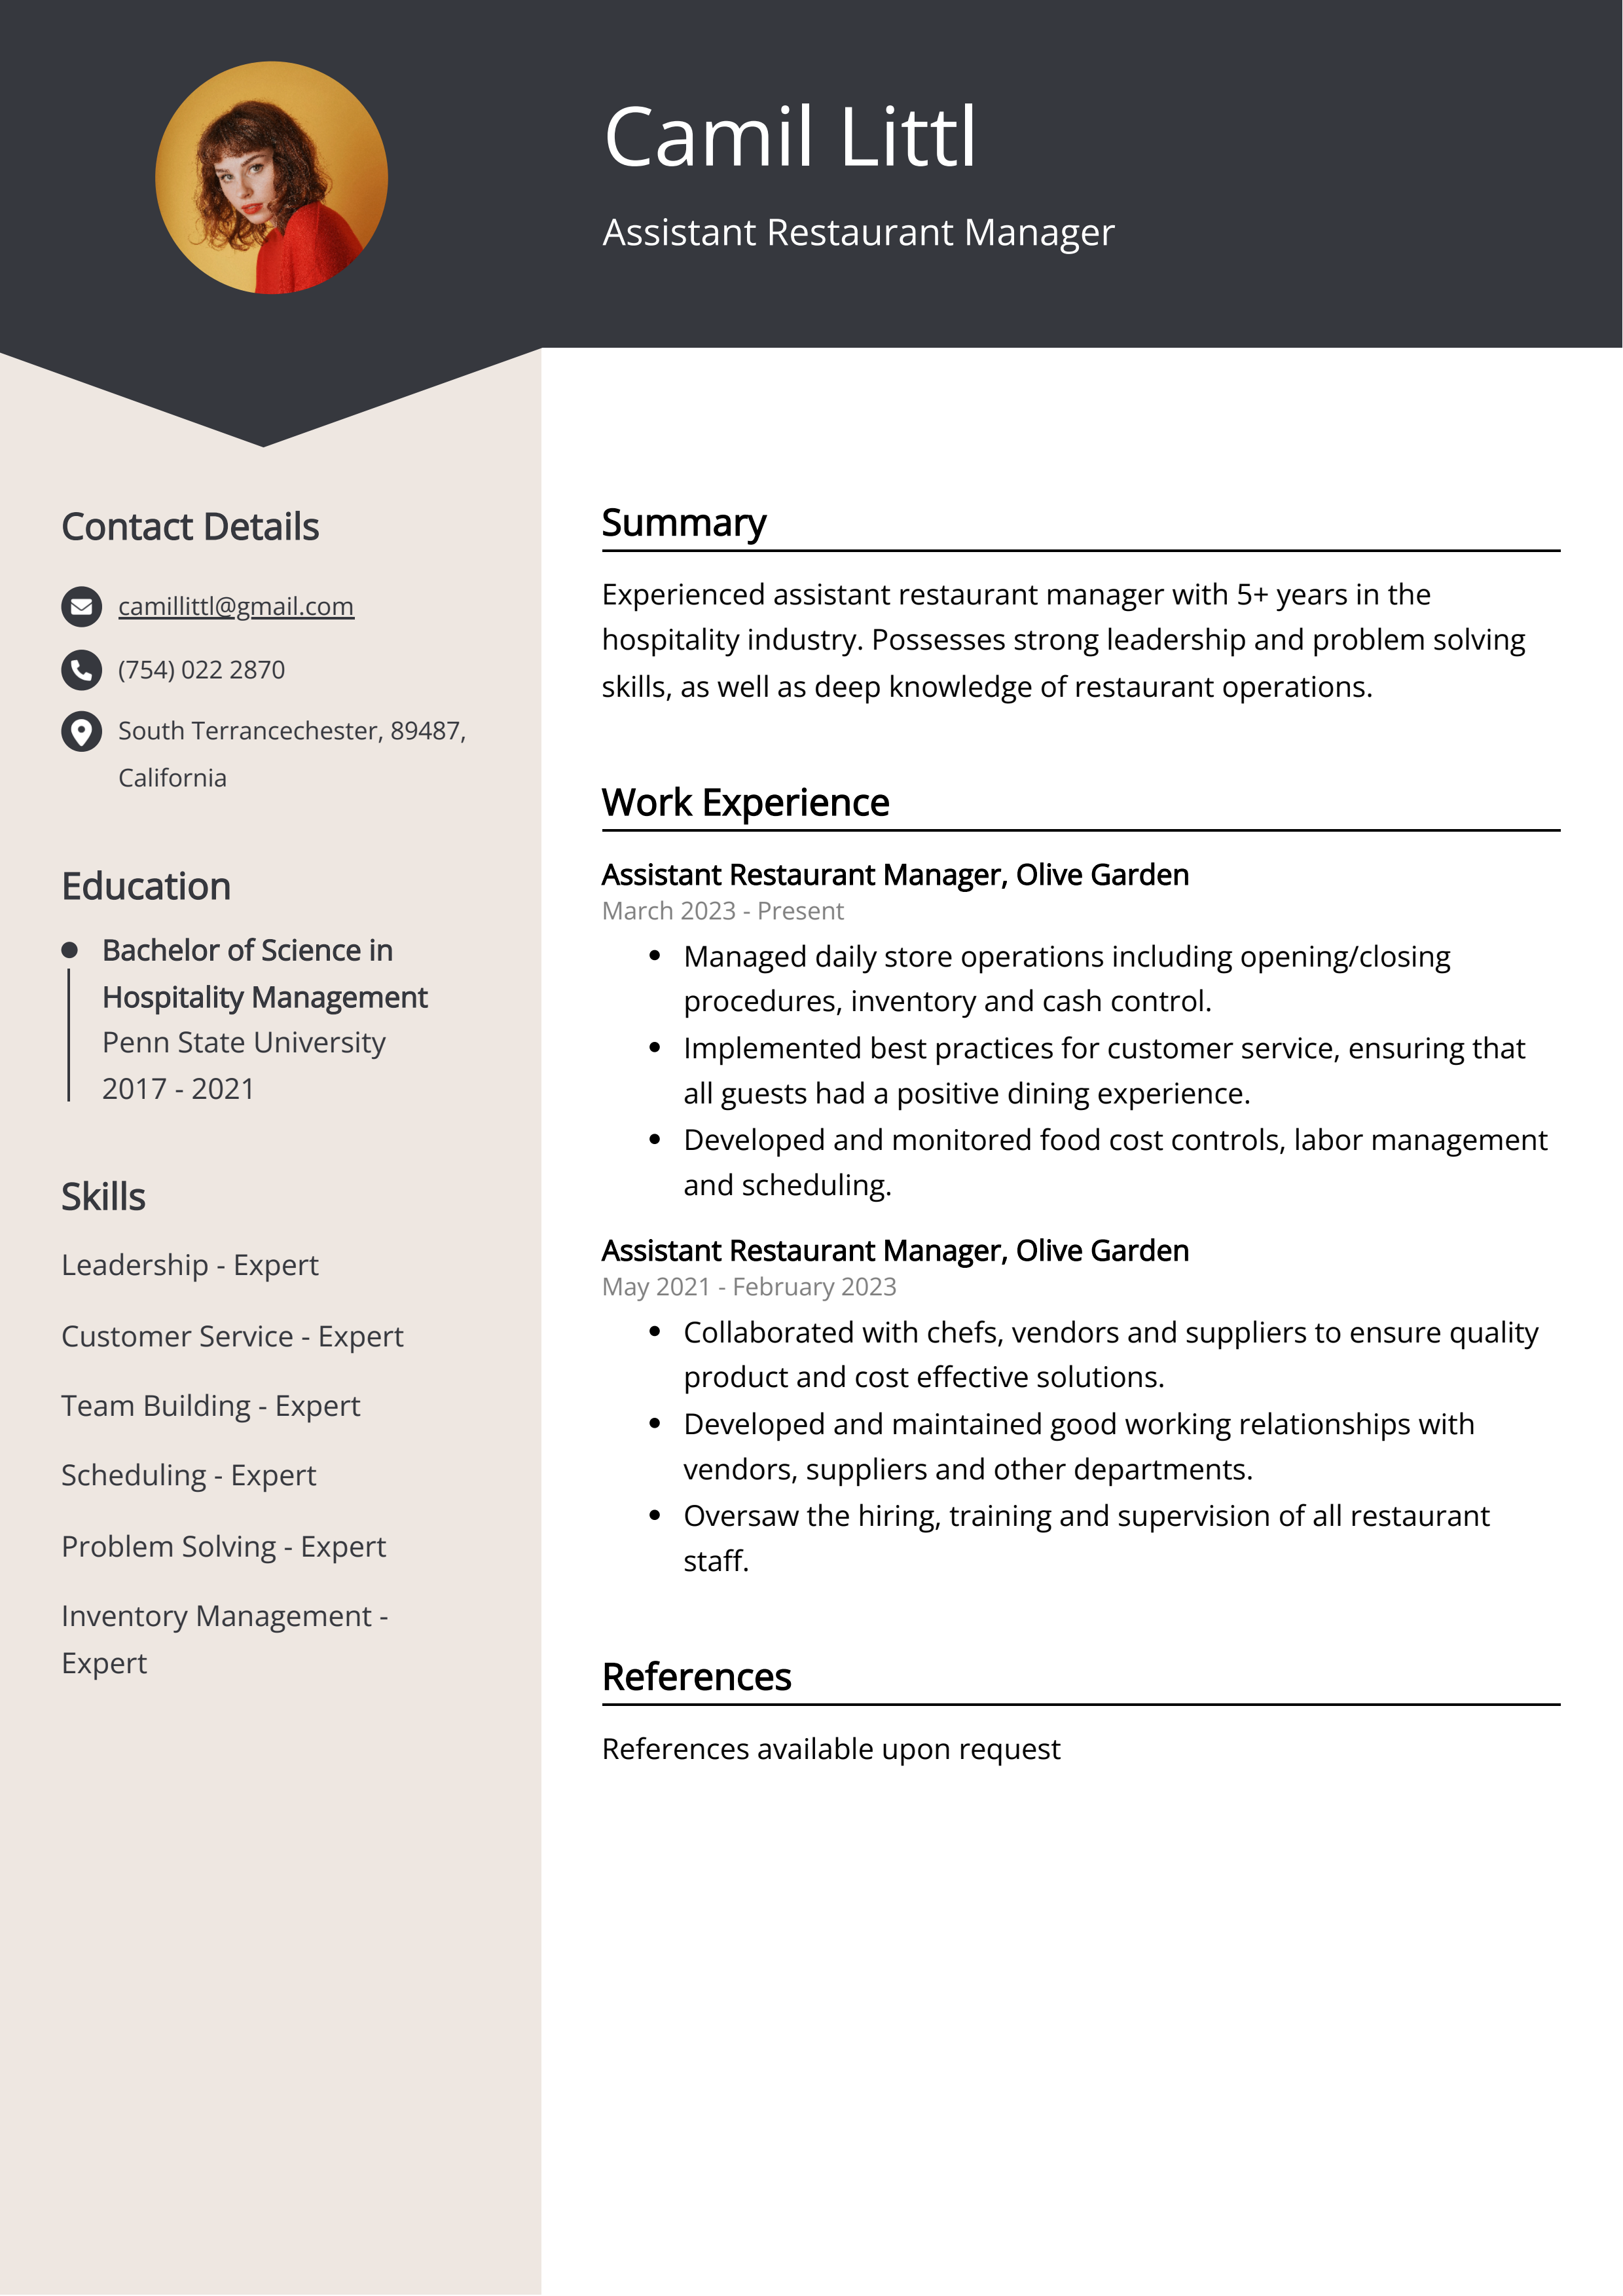 Assistant Restaurant Manager CV Example